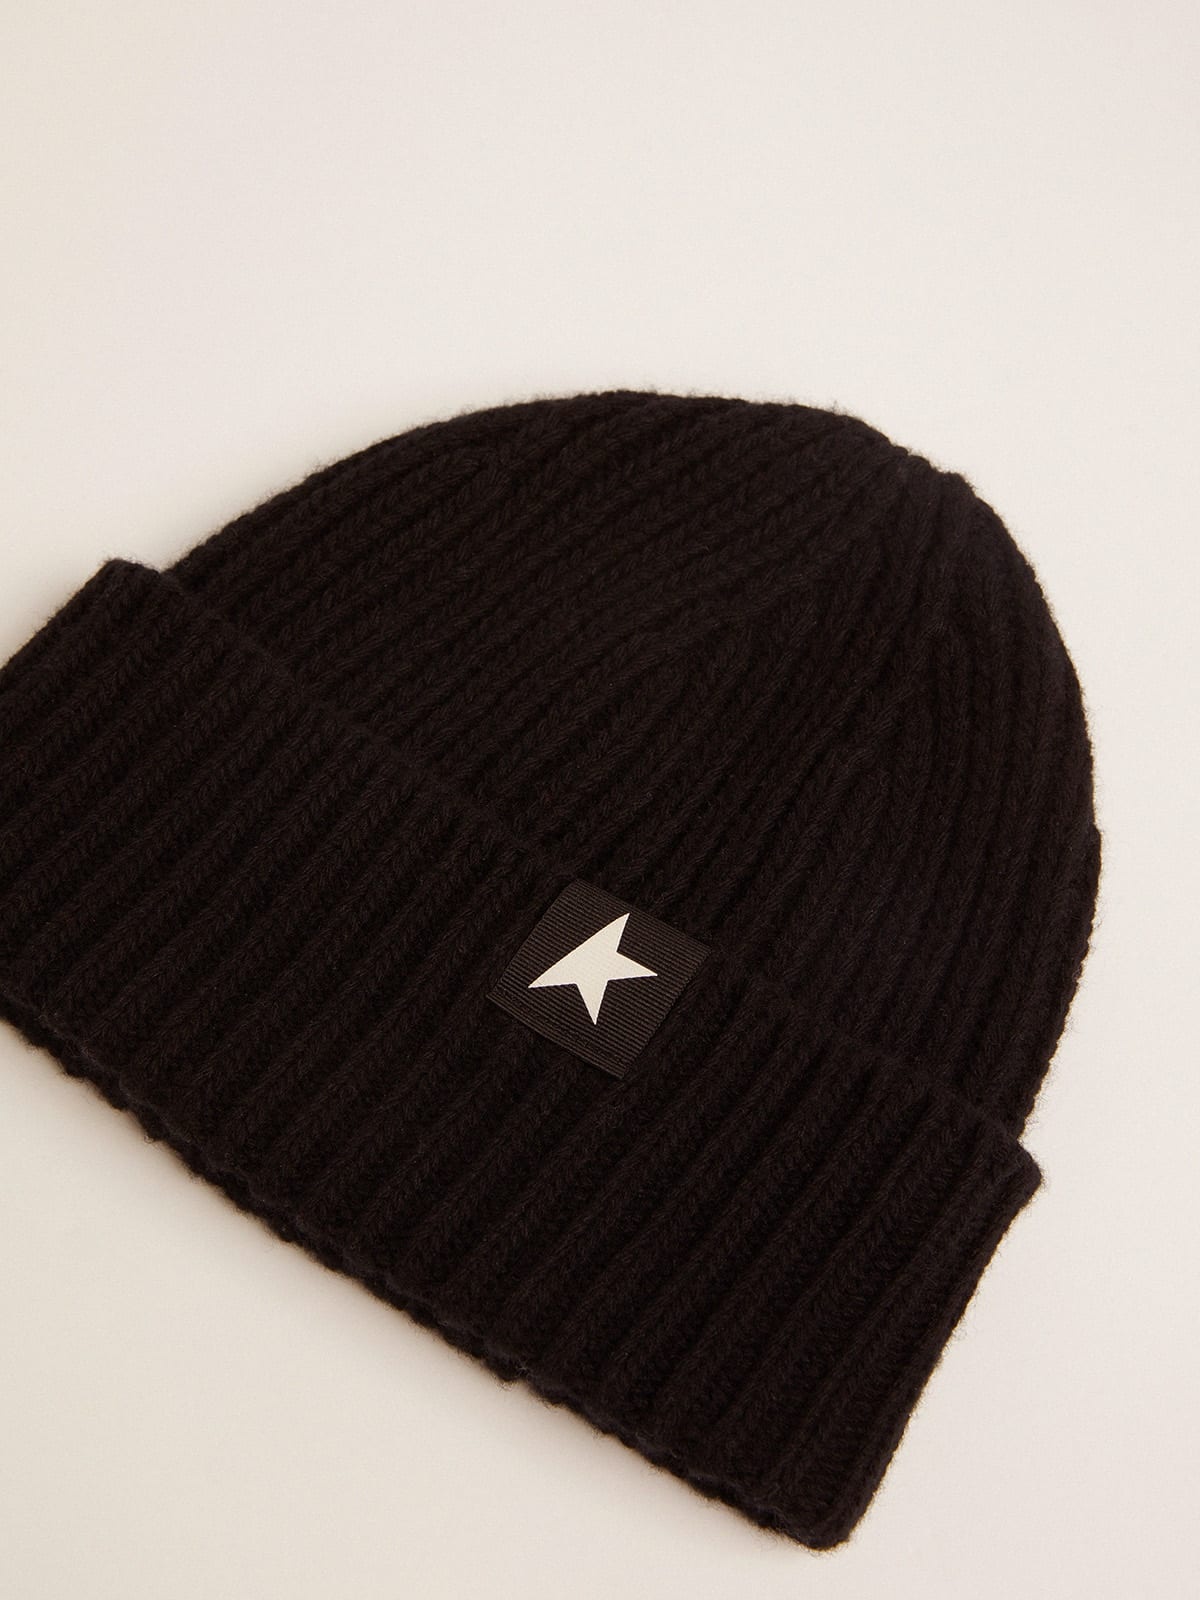 Black wool beanie with contrasting white star - 2